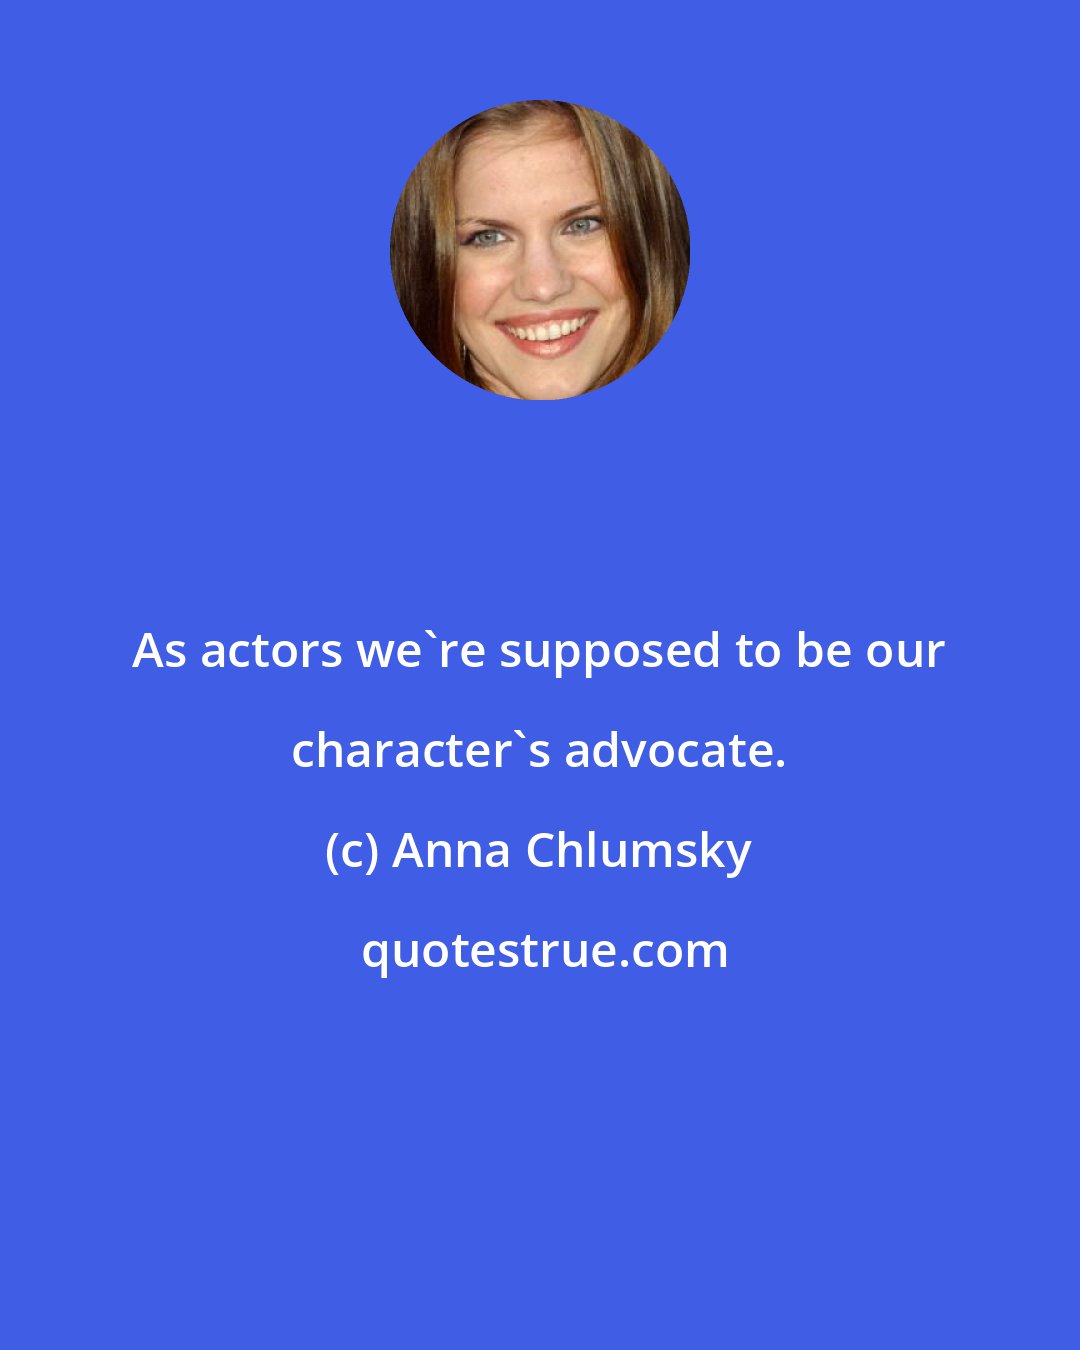 Anna Chlumsky: As actors we're supposed to be our character's advocate.